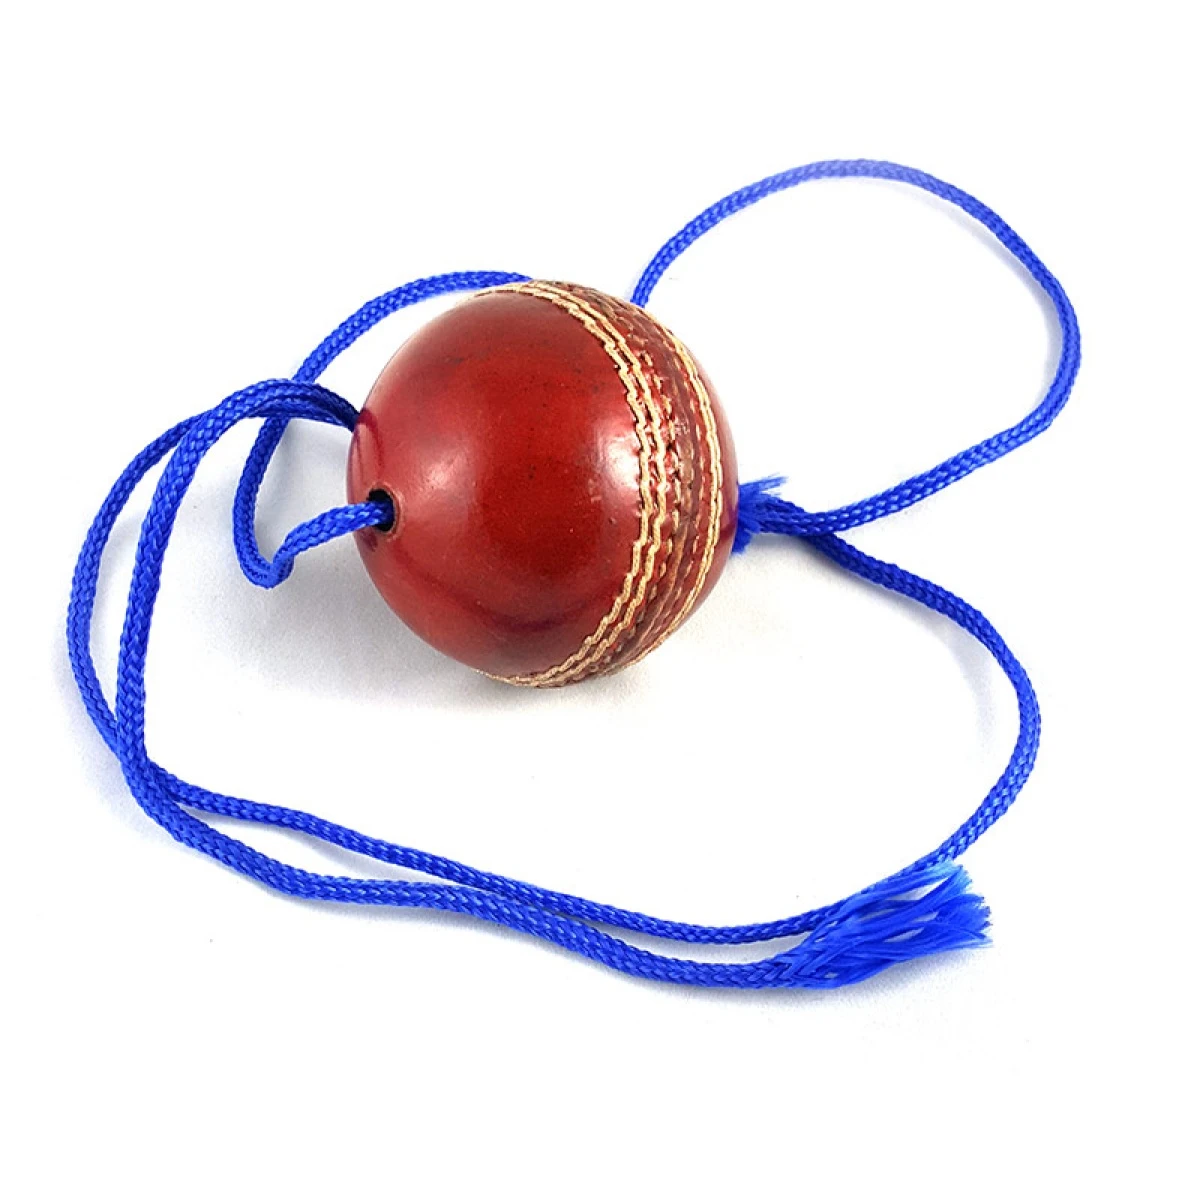 Buy High Quality Hanging Cricket Ball for Practice